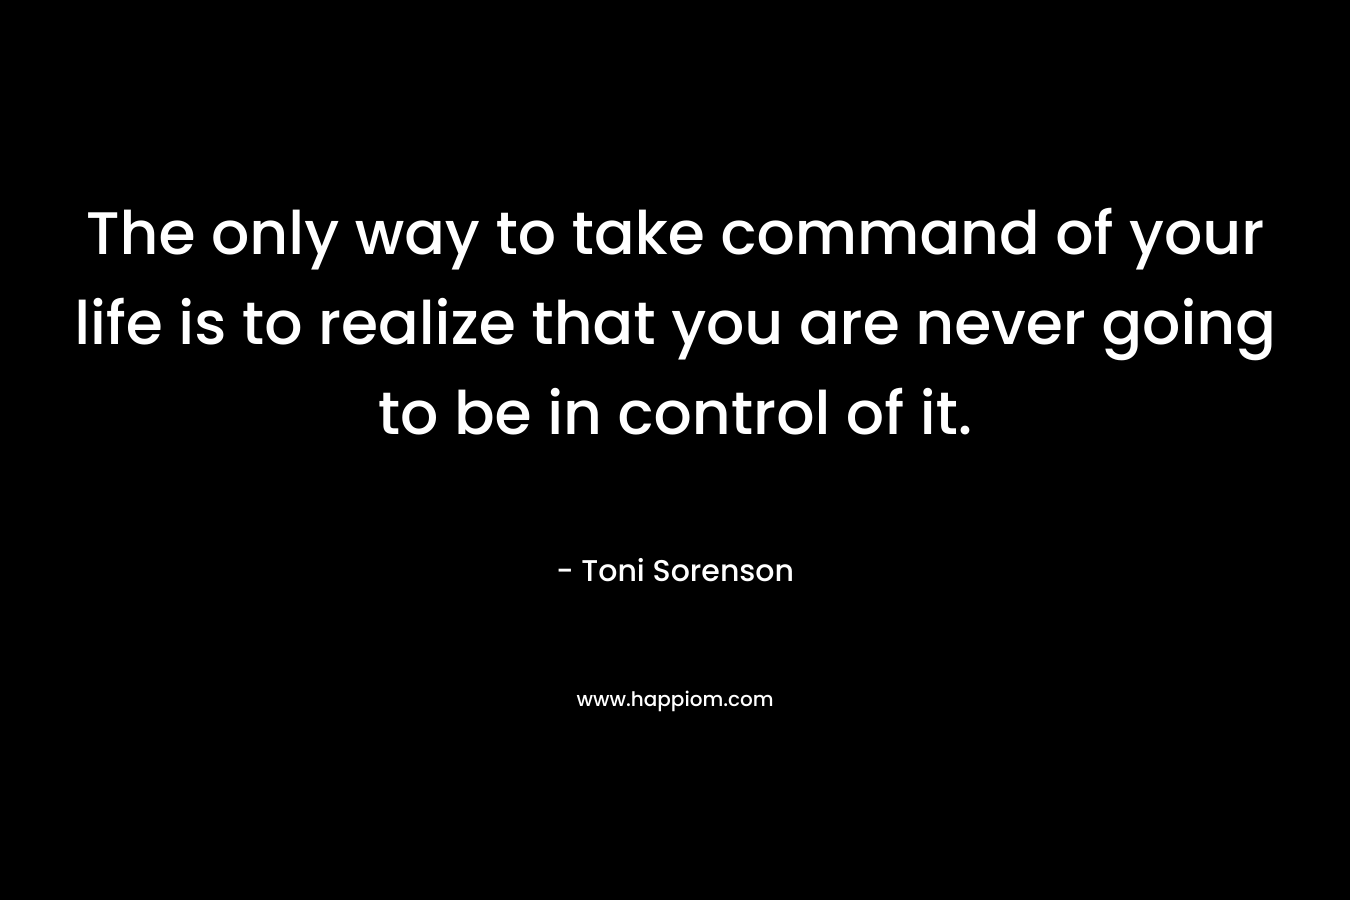 The only way to take command of your life is to realize that you are never going to be in control of it.